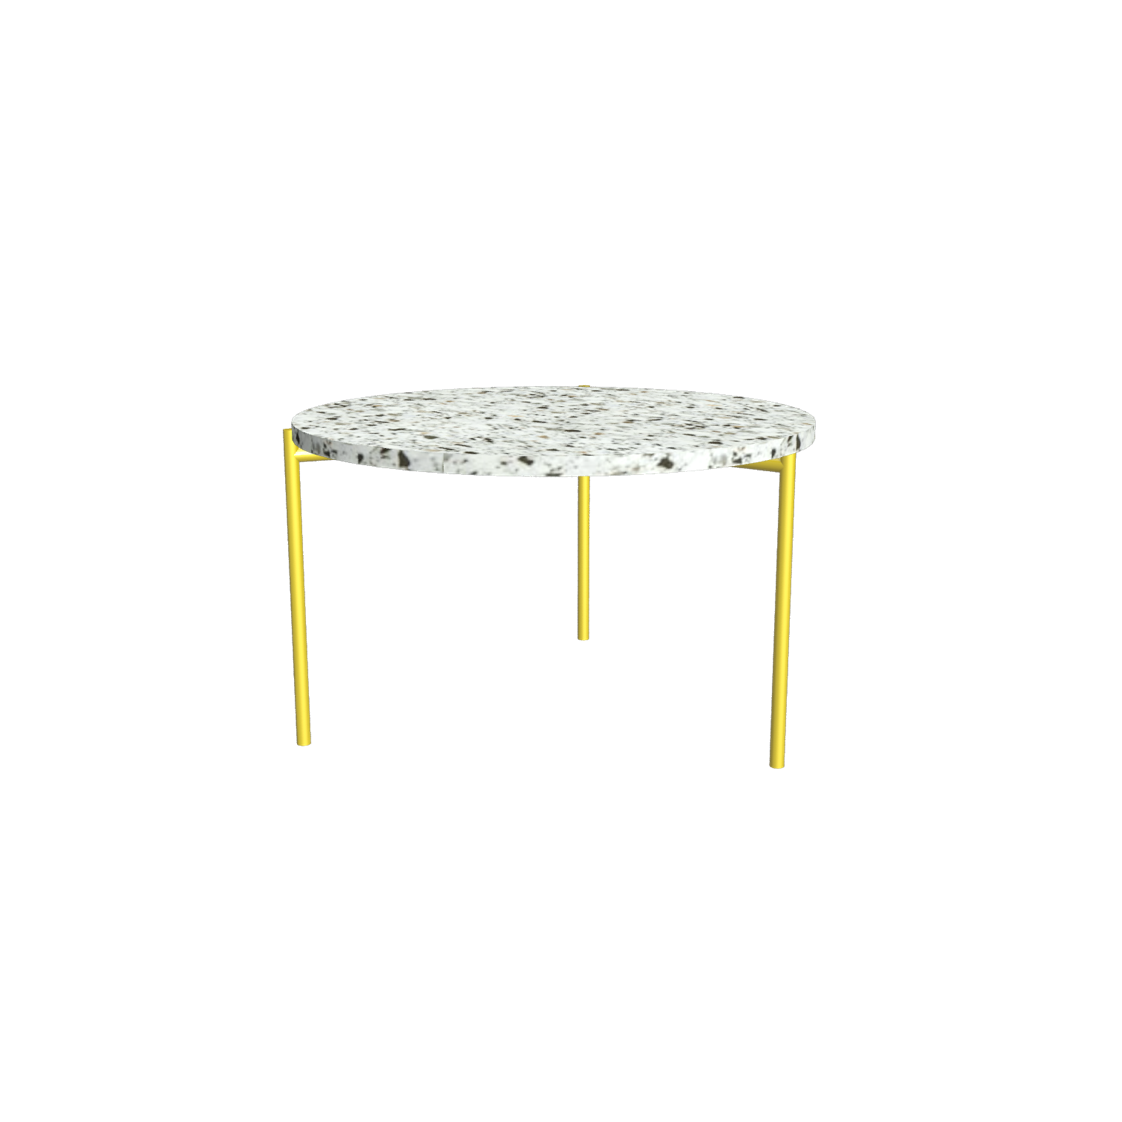 COFFEE TABLE, ROUND, SMALL - Customer's Product with price 2600.00